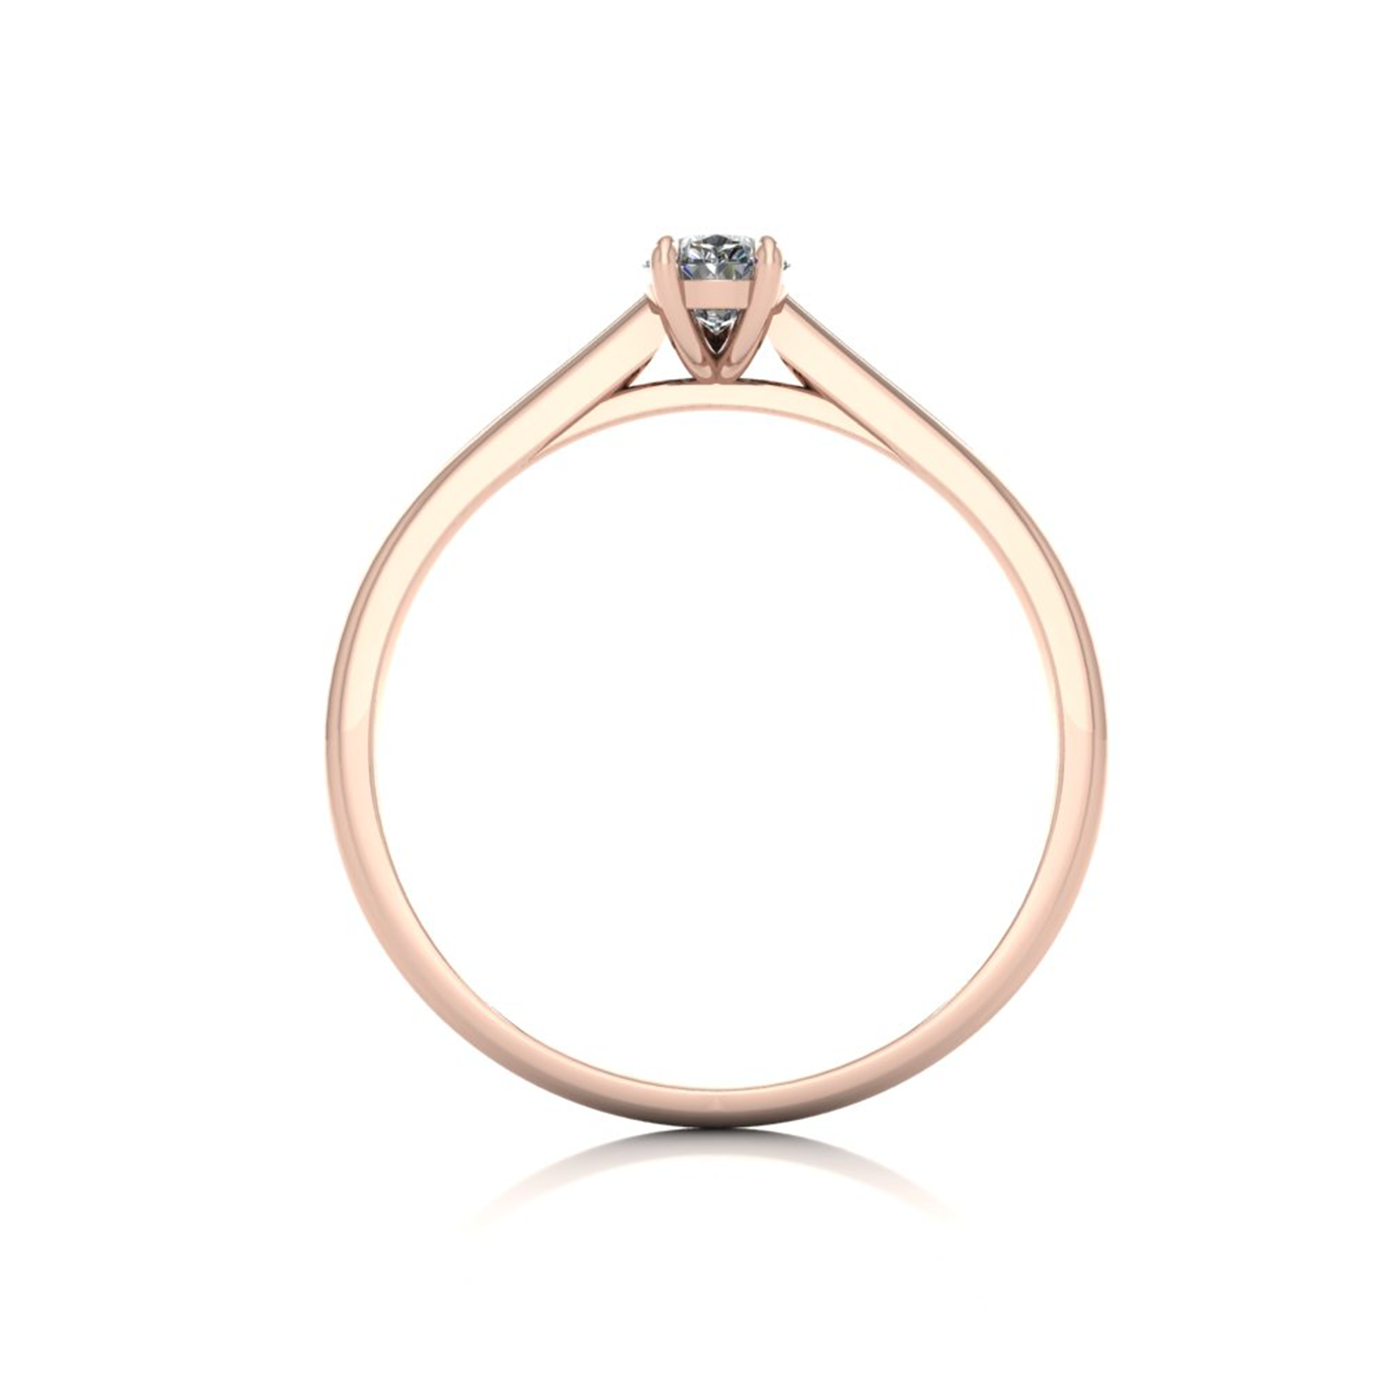 18k rose gold  0,30 ct 3 prongs solitaire pear cut diamond engagement ring with whisper thin band